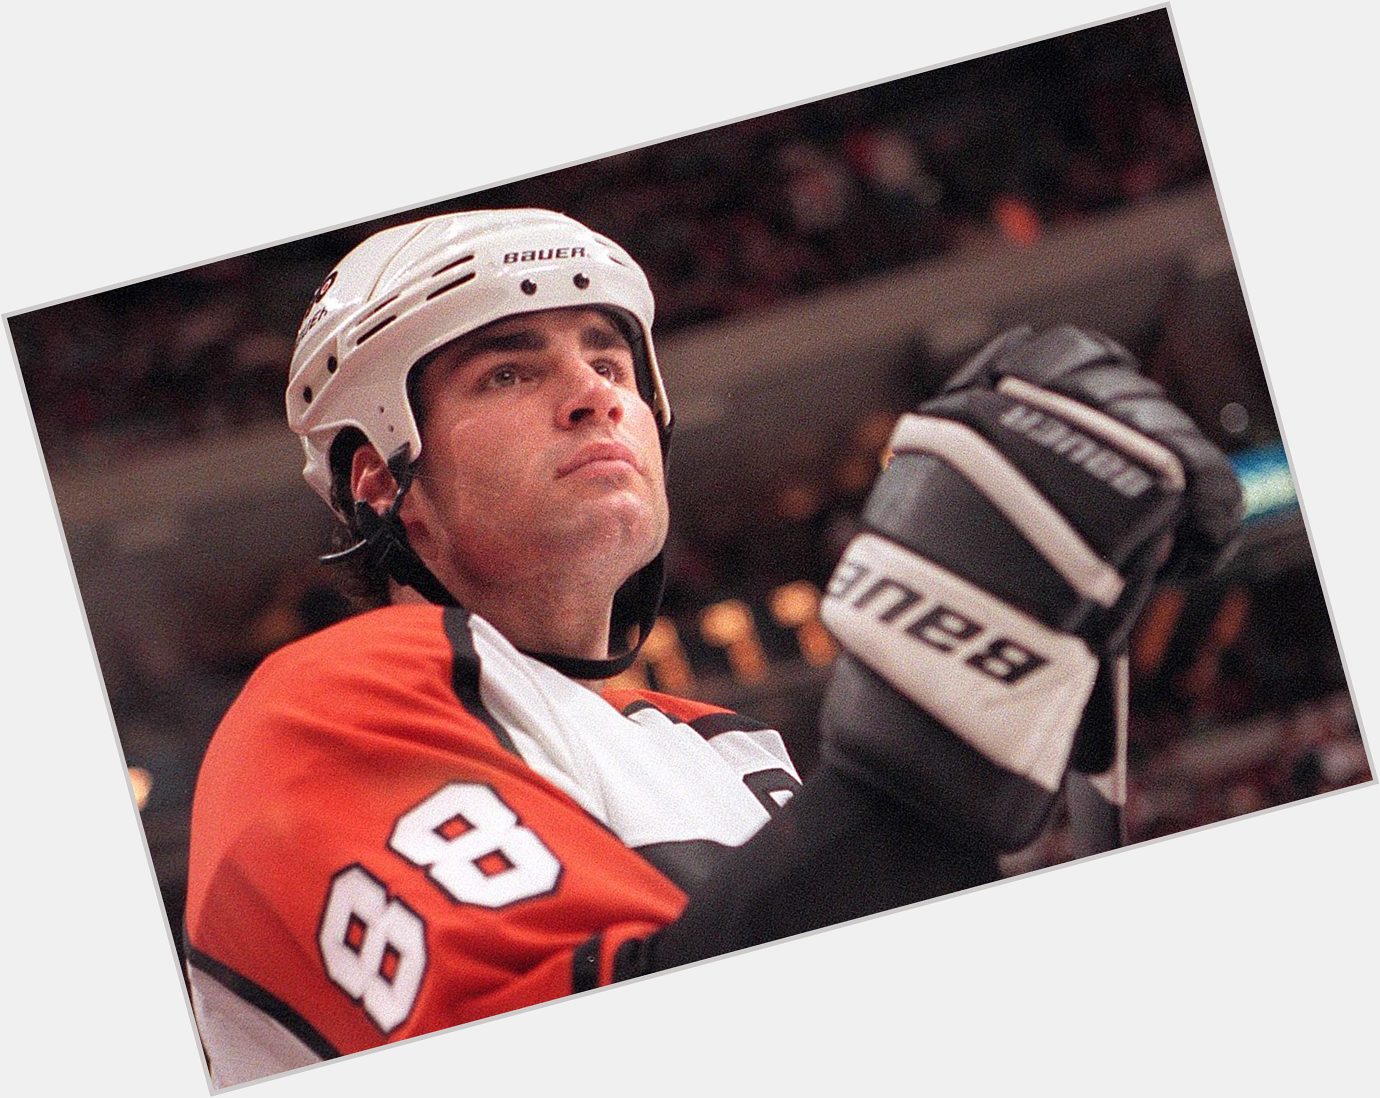 A very happy birthday goes out to London Ontario born, former center Eric Lindros! 